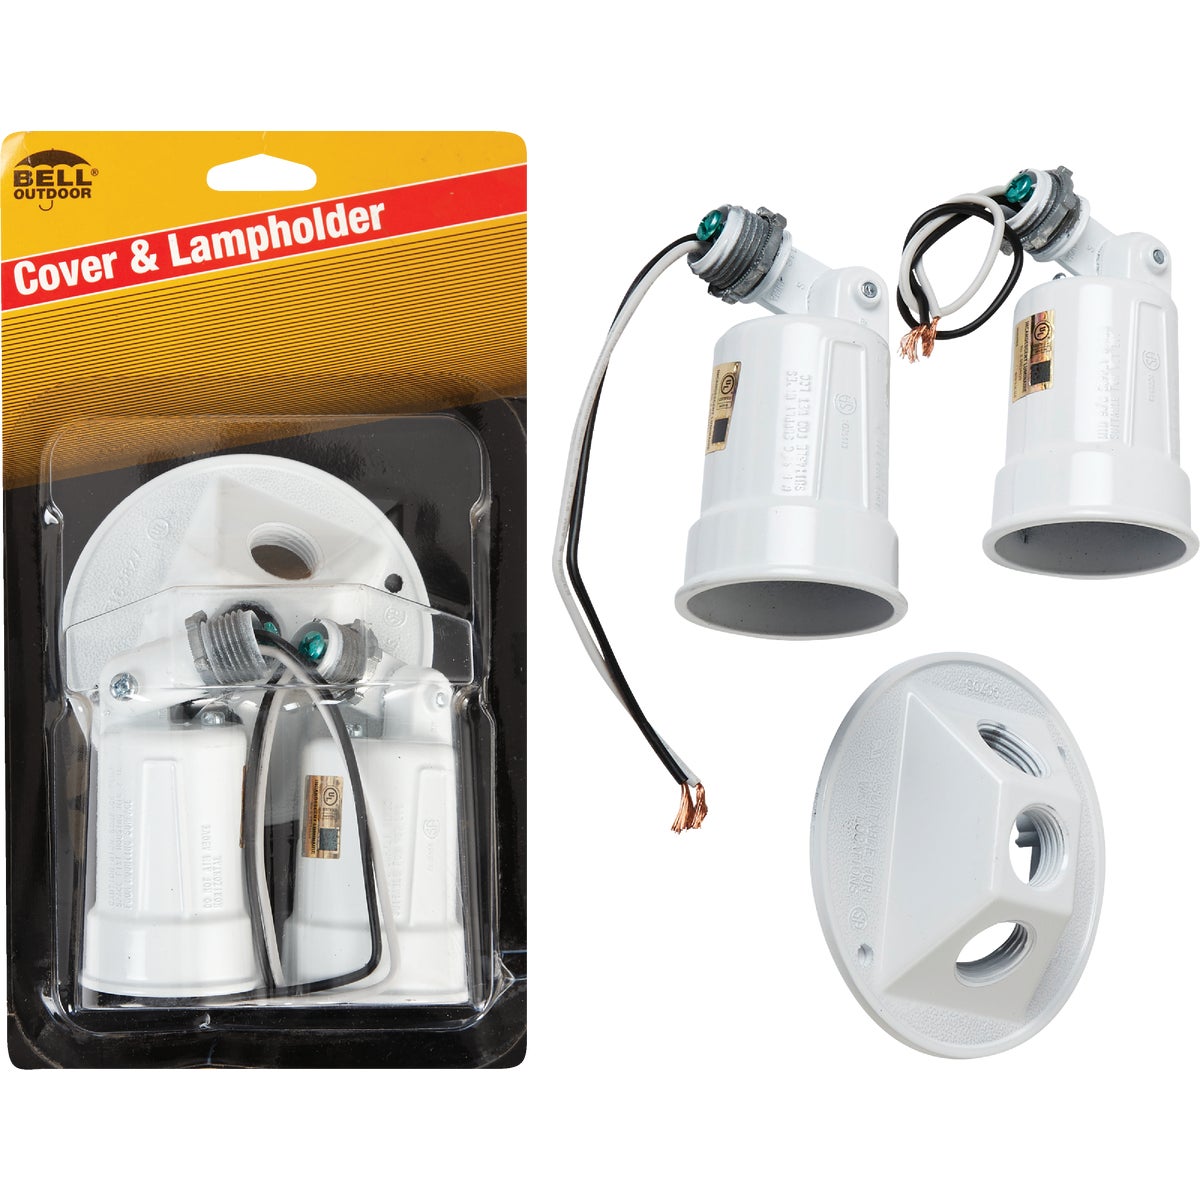 Bell 150W Aluminum Round Double White Weatherproof Outdoor Lampholder with Cover, Carded